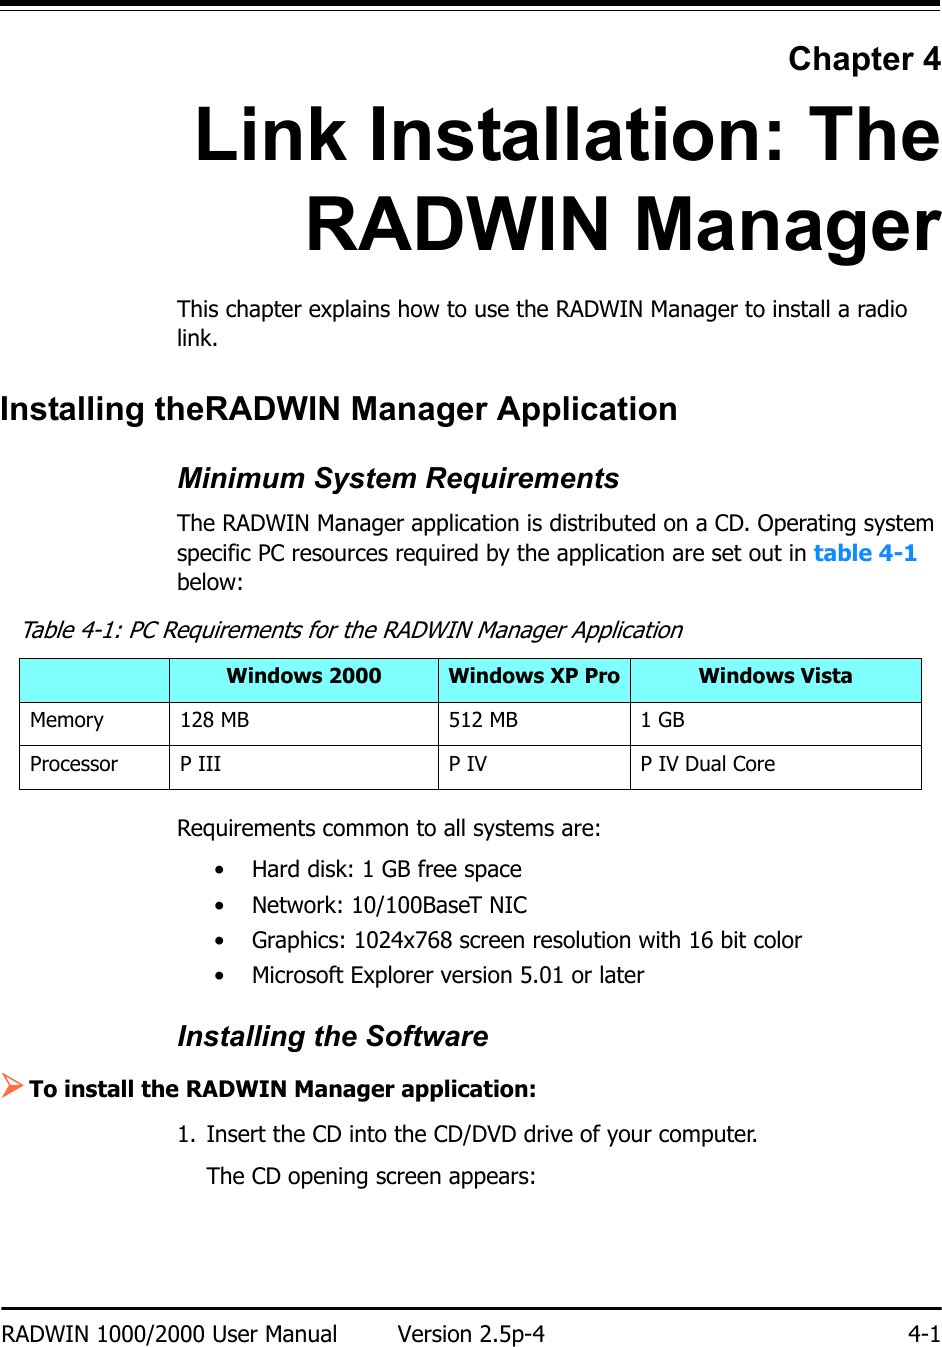 RADWIN 1000/2000 User Manual Version 2.5p-4 4-1Chapter 4Link Installation: TheRADWIN ManagerThis chapter explains how to use the RADWIN Manager to install a radio link.Installing theRADWIN Manager ApplicationMinimum System RequirementsThe RADWIN Manager application is distributed on a CD. Operating system specific PC resources required by the application are set out in table 4-1 below:Requirements common to all systems are:• Hard disk: 1 GB free space• Network: 10/100BaseT NIC• Graphics: 1024x768 screen resolution with 16 bit color• Microsoft Explorer version 5.01 or laterInstalling the Software¾To install the RADWIN Manager application:1. Insert the CD into the CD/DVD drive of your computer.The CD opening screen appears:Table 4-1: PC Requirements for the RADWIN Manager ApplicationWindows 2000 Windows XP Pro Windows VistaMemory 128 MB 512 MB 1 GBProcessor P III P IV P IV Dual Core